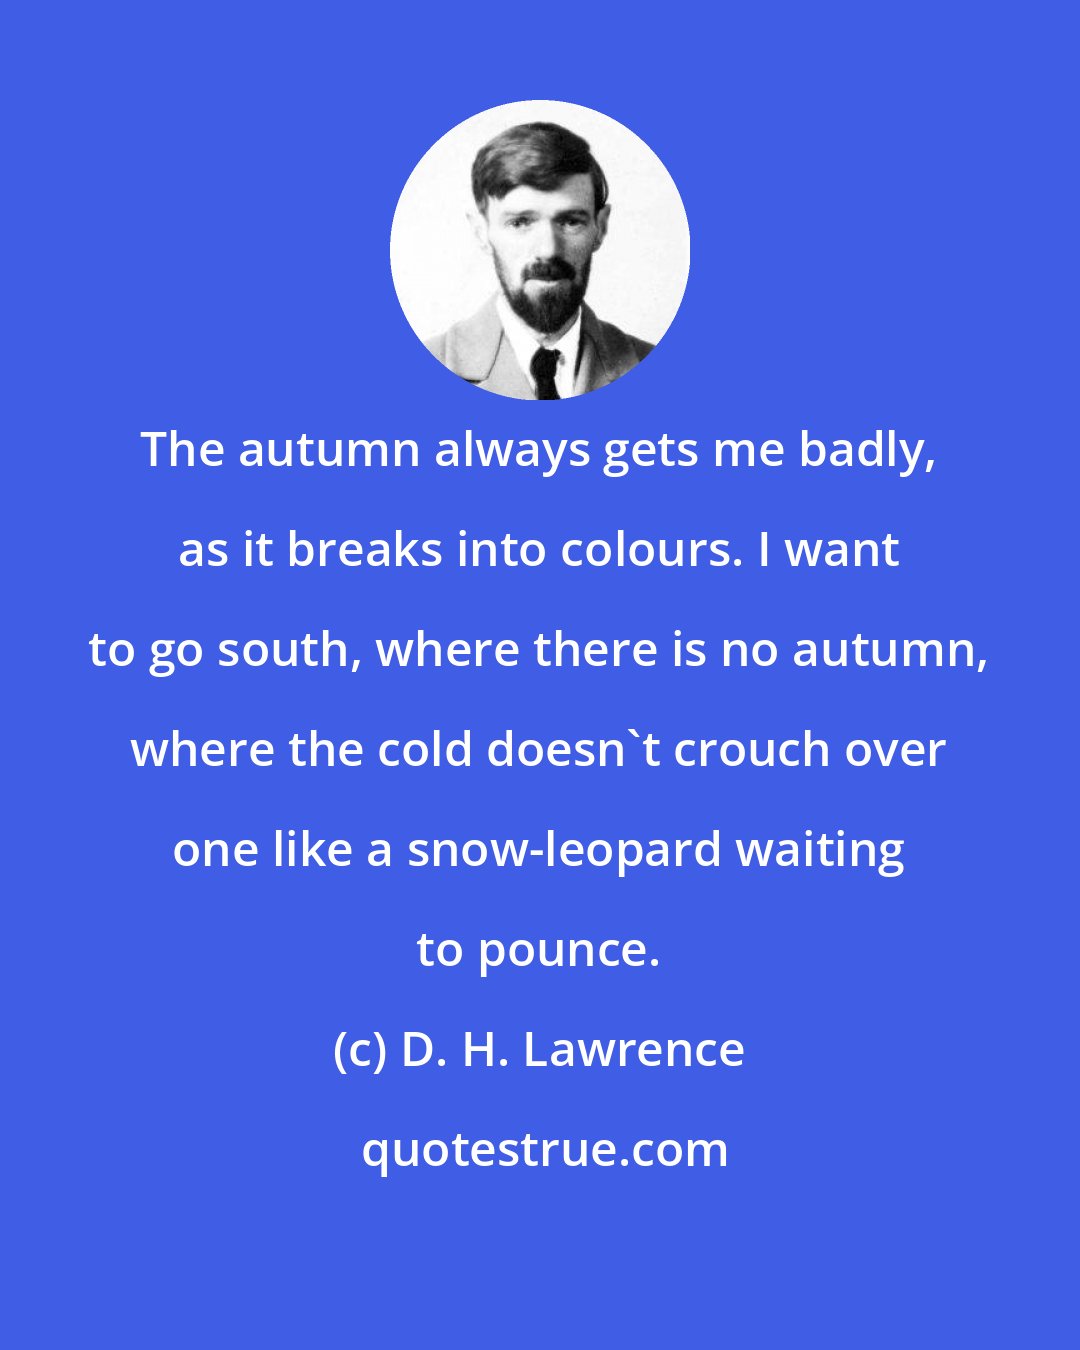 D. H. Lawrence: The autumn always gets me badly, as it breaks into colours. I want to go south, where there is no autumn, where the cold doesn't crouch over one like a snow-leopard waiting to pounce.